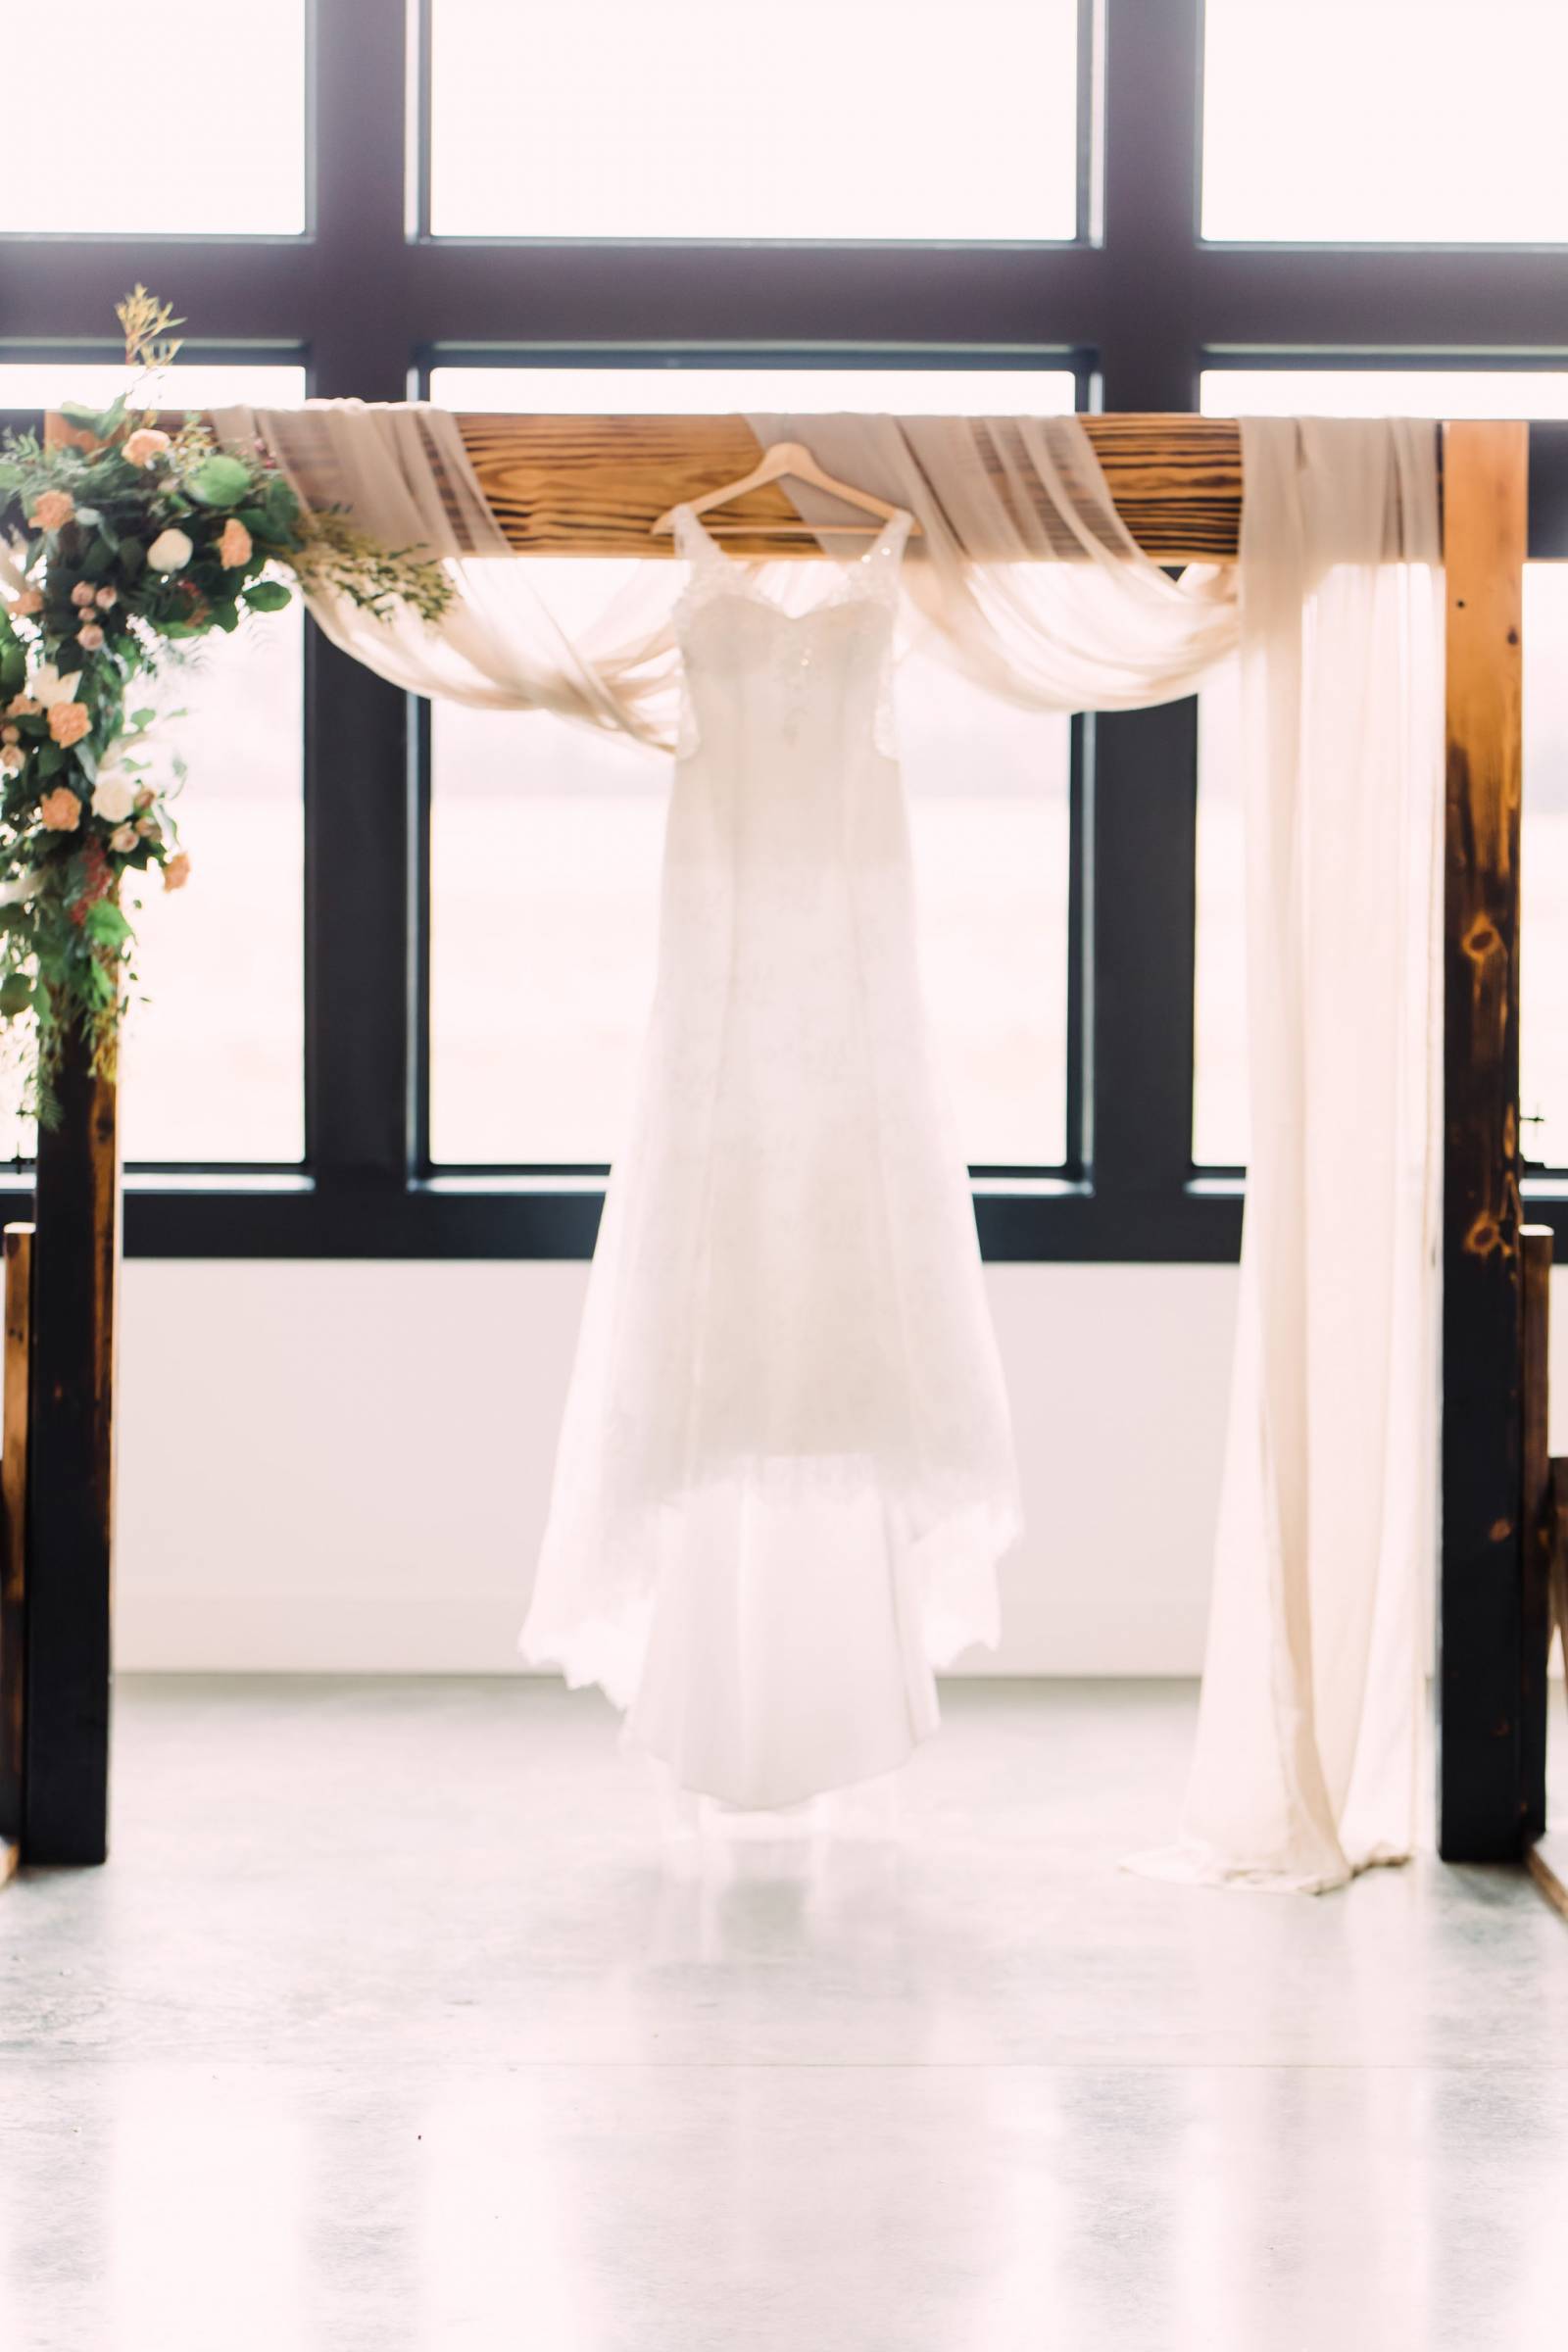 wooden ceremony arch with fabric